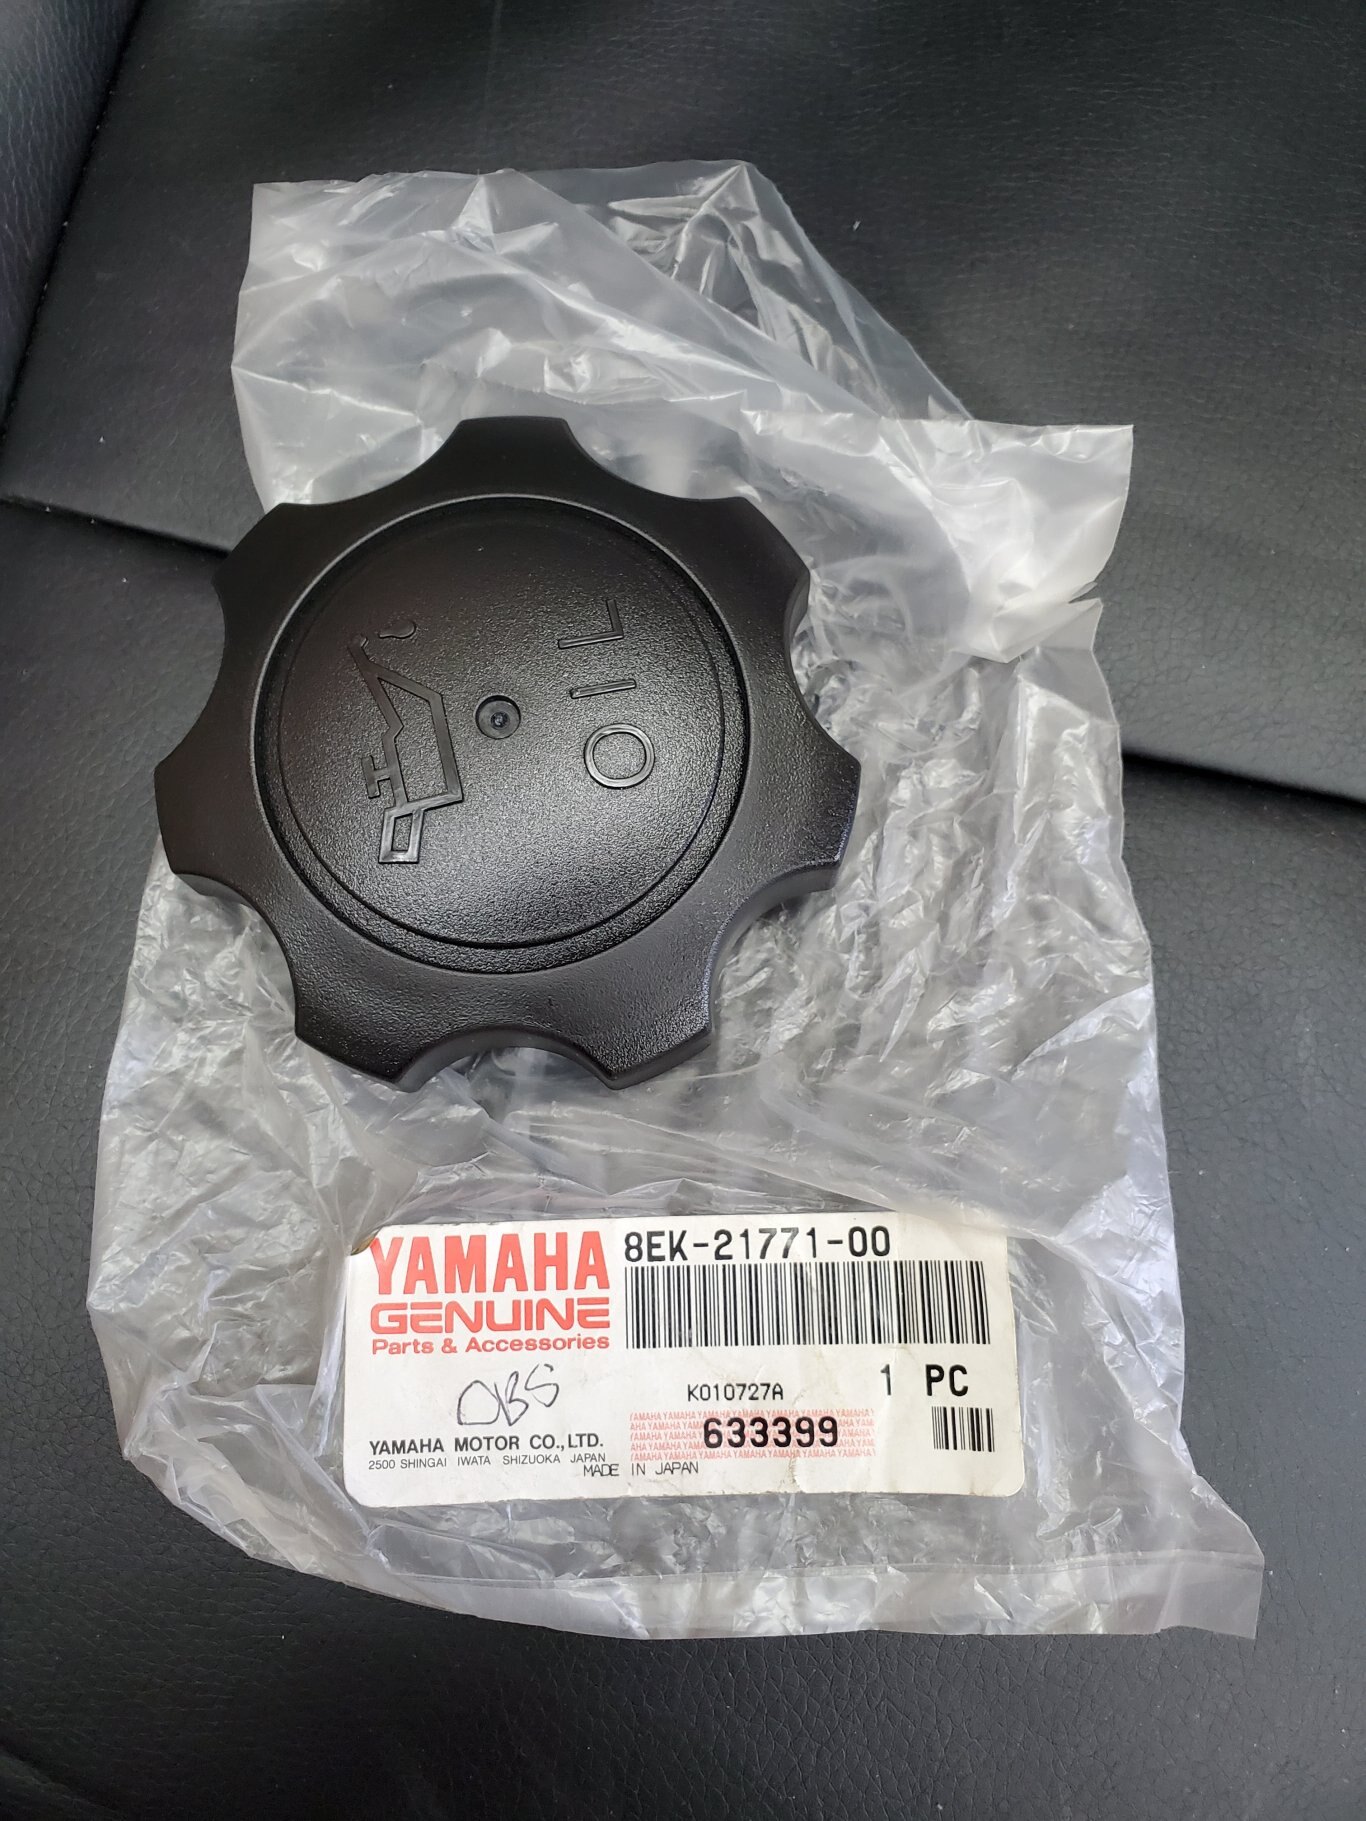 YAMAHA 2002 SX VIPER 700 SXV SXV700 OEM OIL HOLDING CONTAINER TANK COVER CAP LID